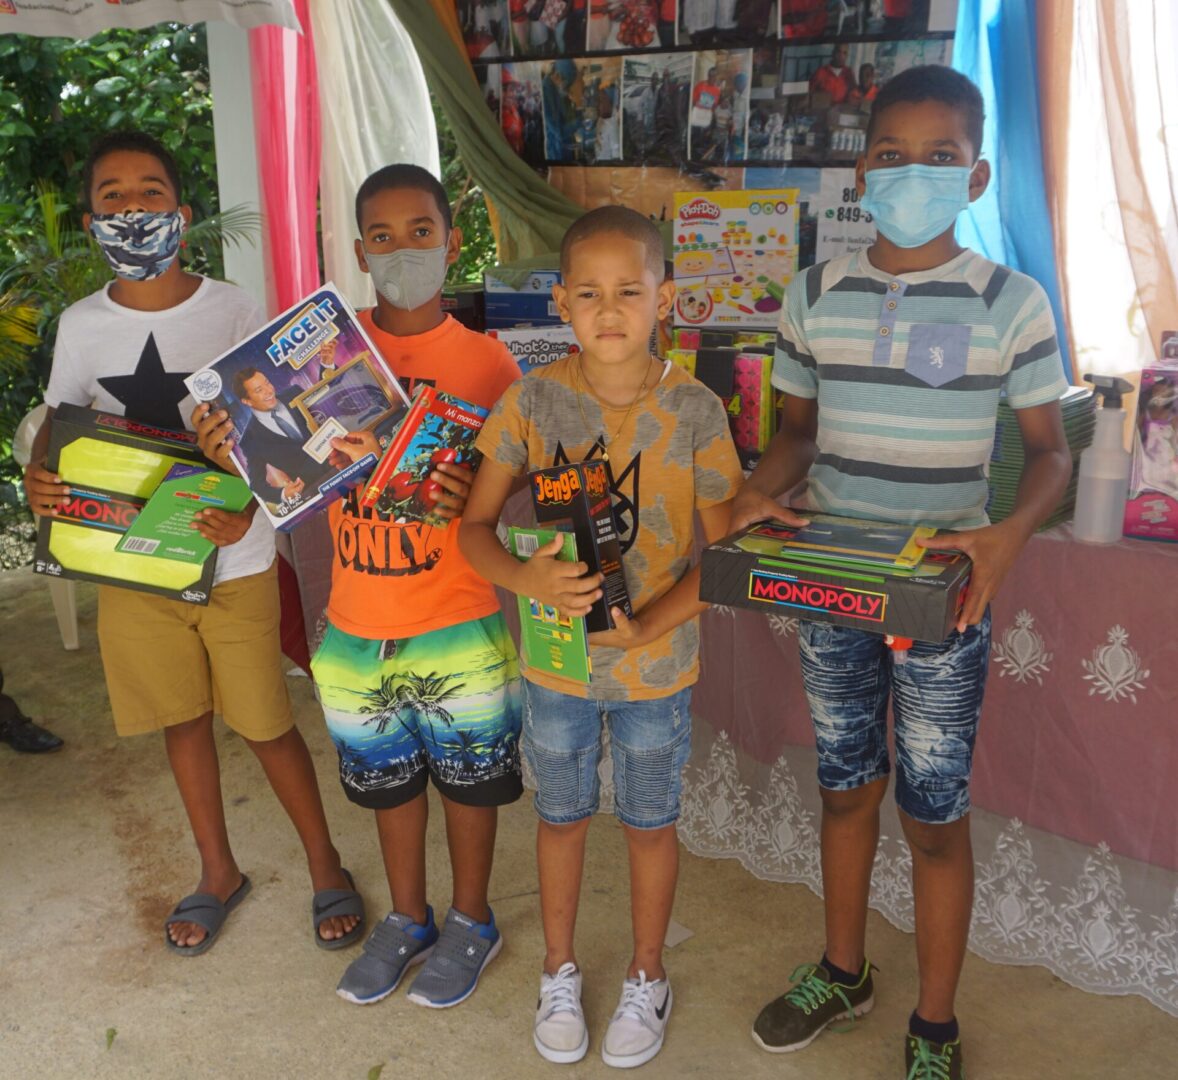 Four boys with masks holding toys in front of a table with books and toys, batch 6